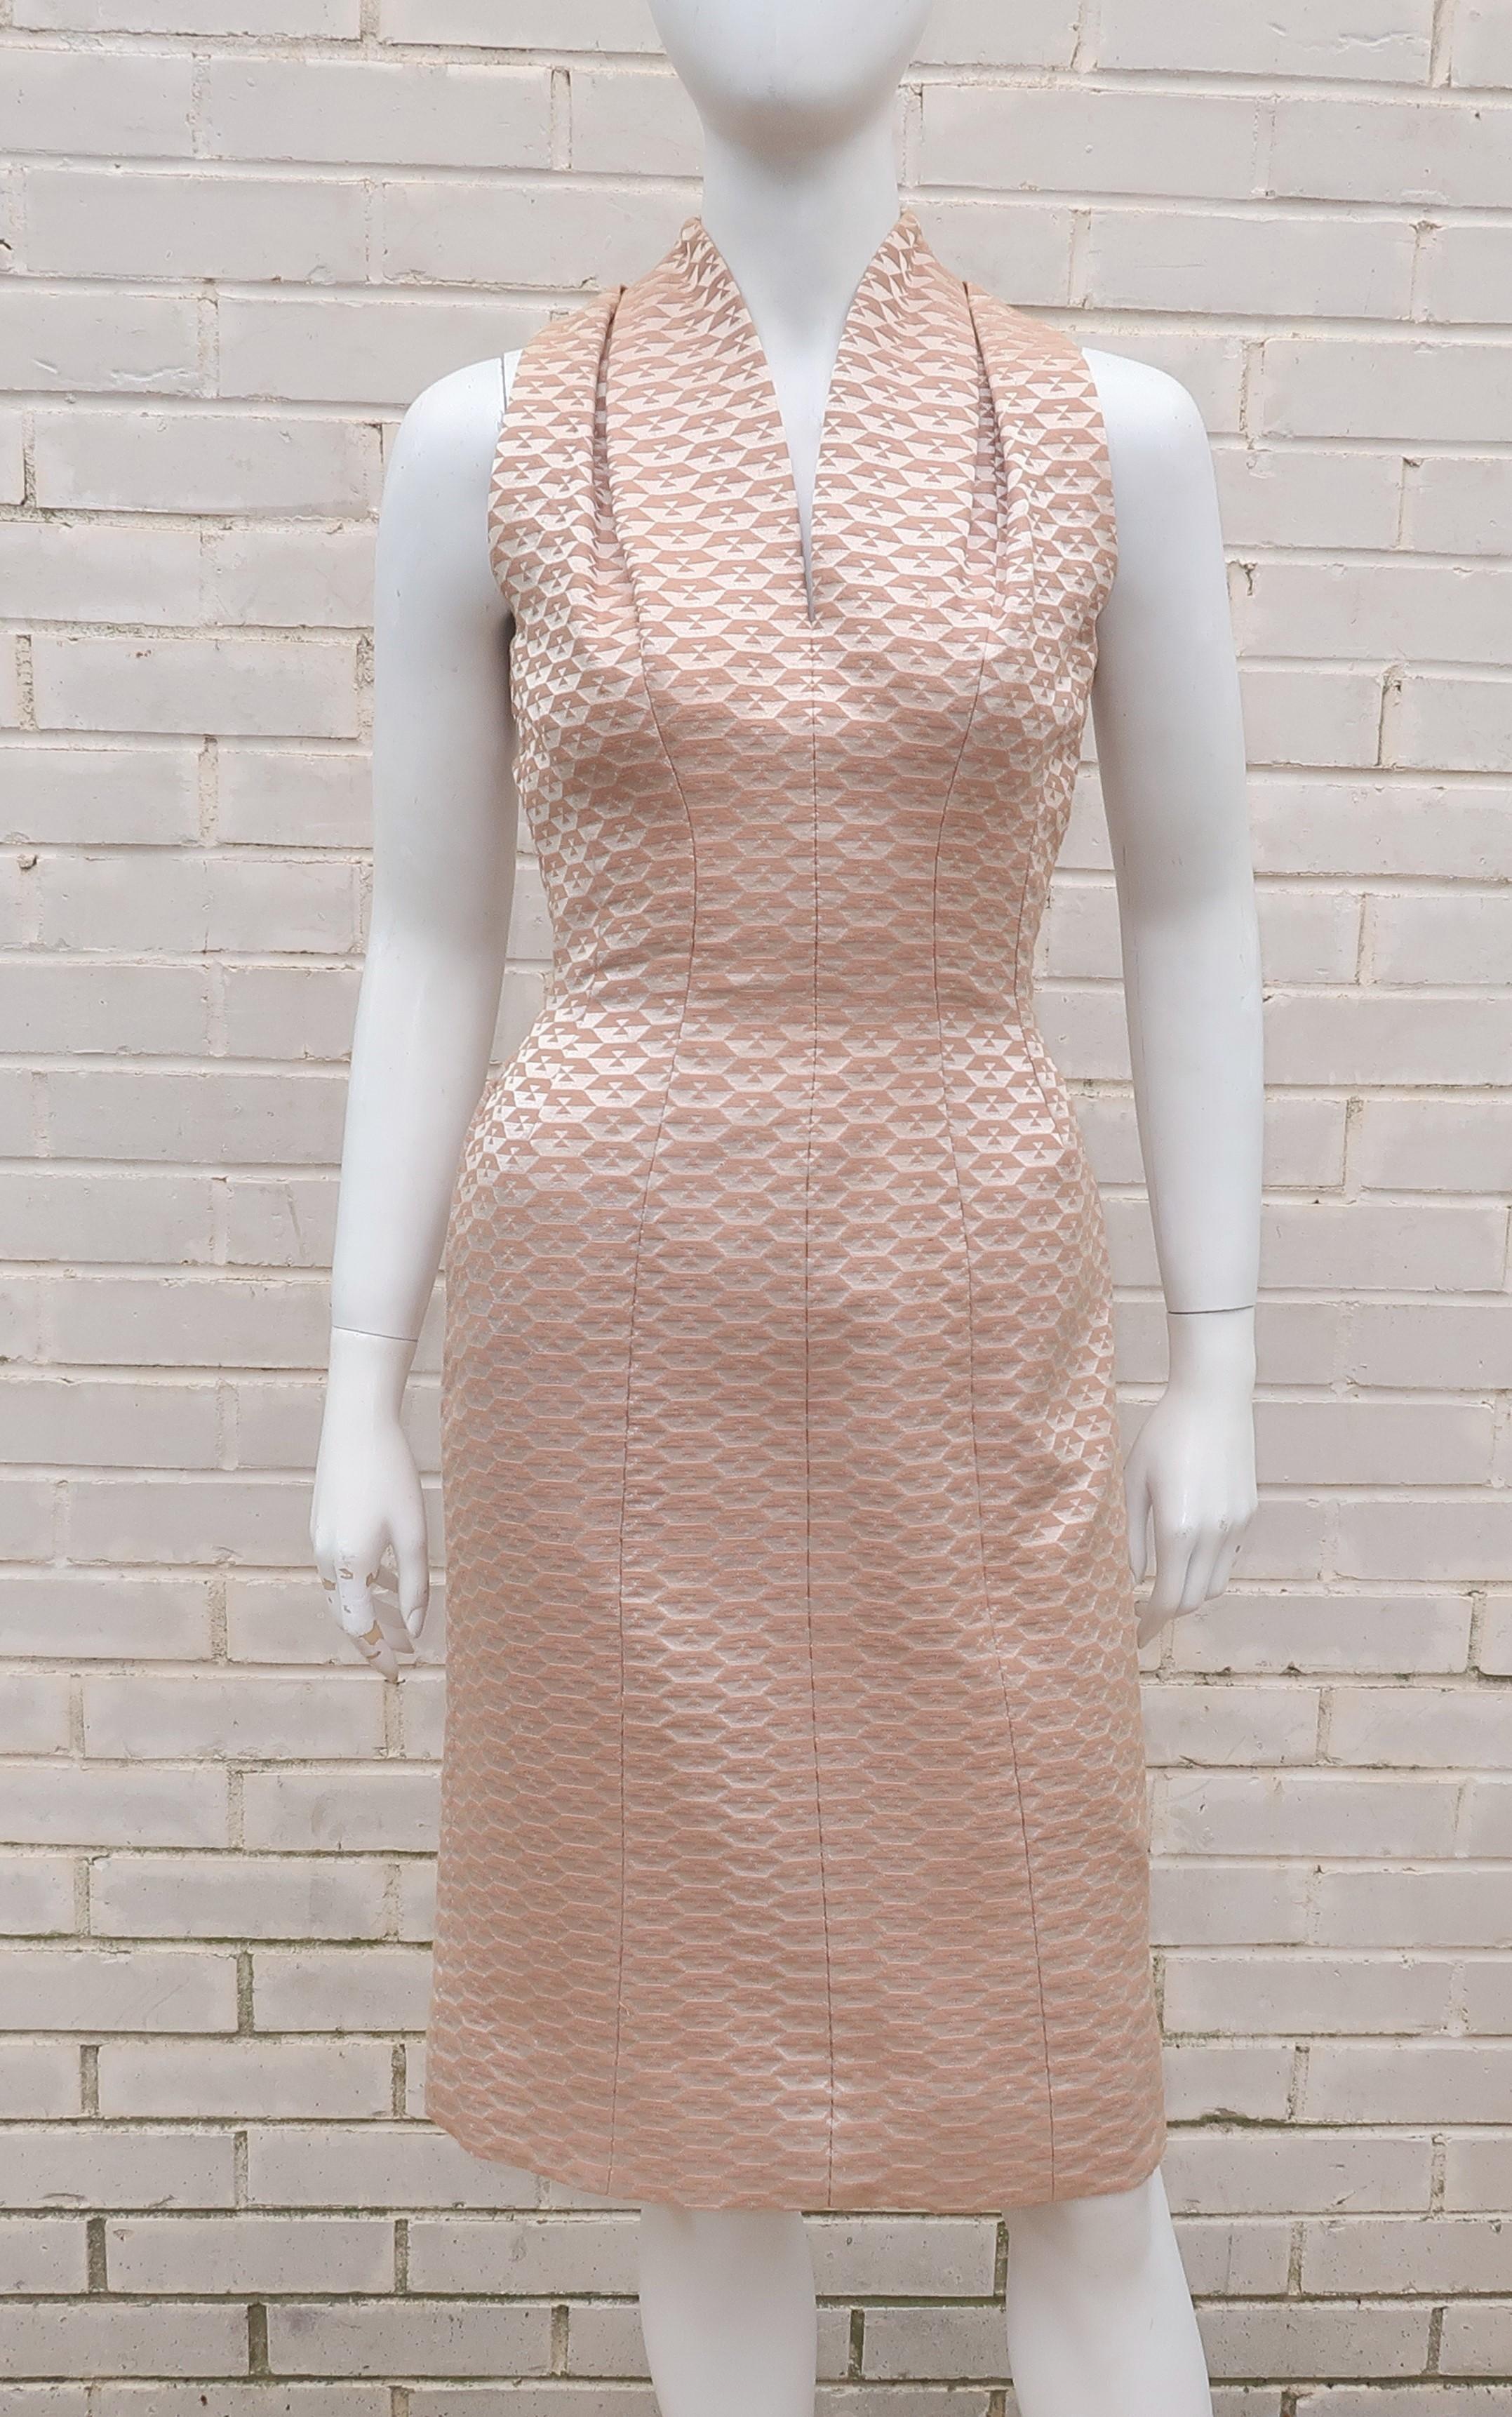 Bombshell alert!  GiGi Young (Suzy Perette's trendier line) creates a brocade cocktail dress with a form fitting silhouette and eye catching graphics.  The fabric offers a champagne satin finish which is offset by a nude shade of beige all with a